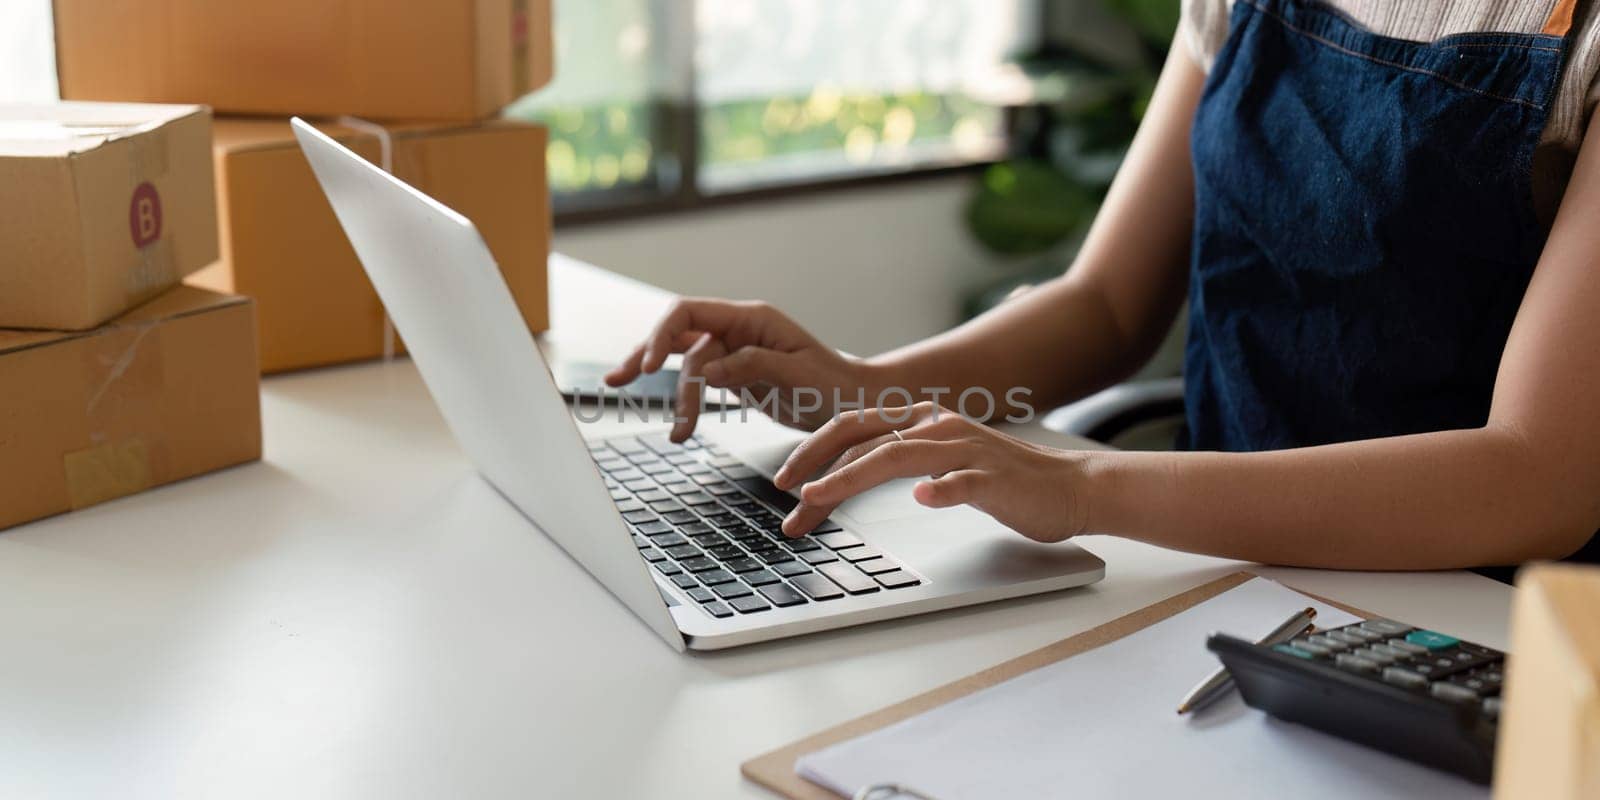 Woman in an online store check the customer address and package information on the laptop. Online shopping concept.